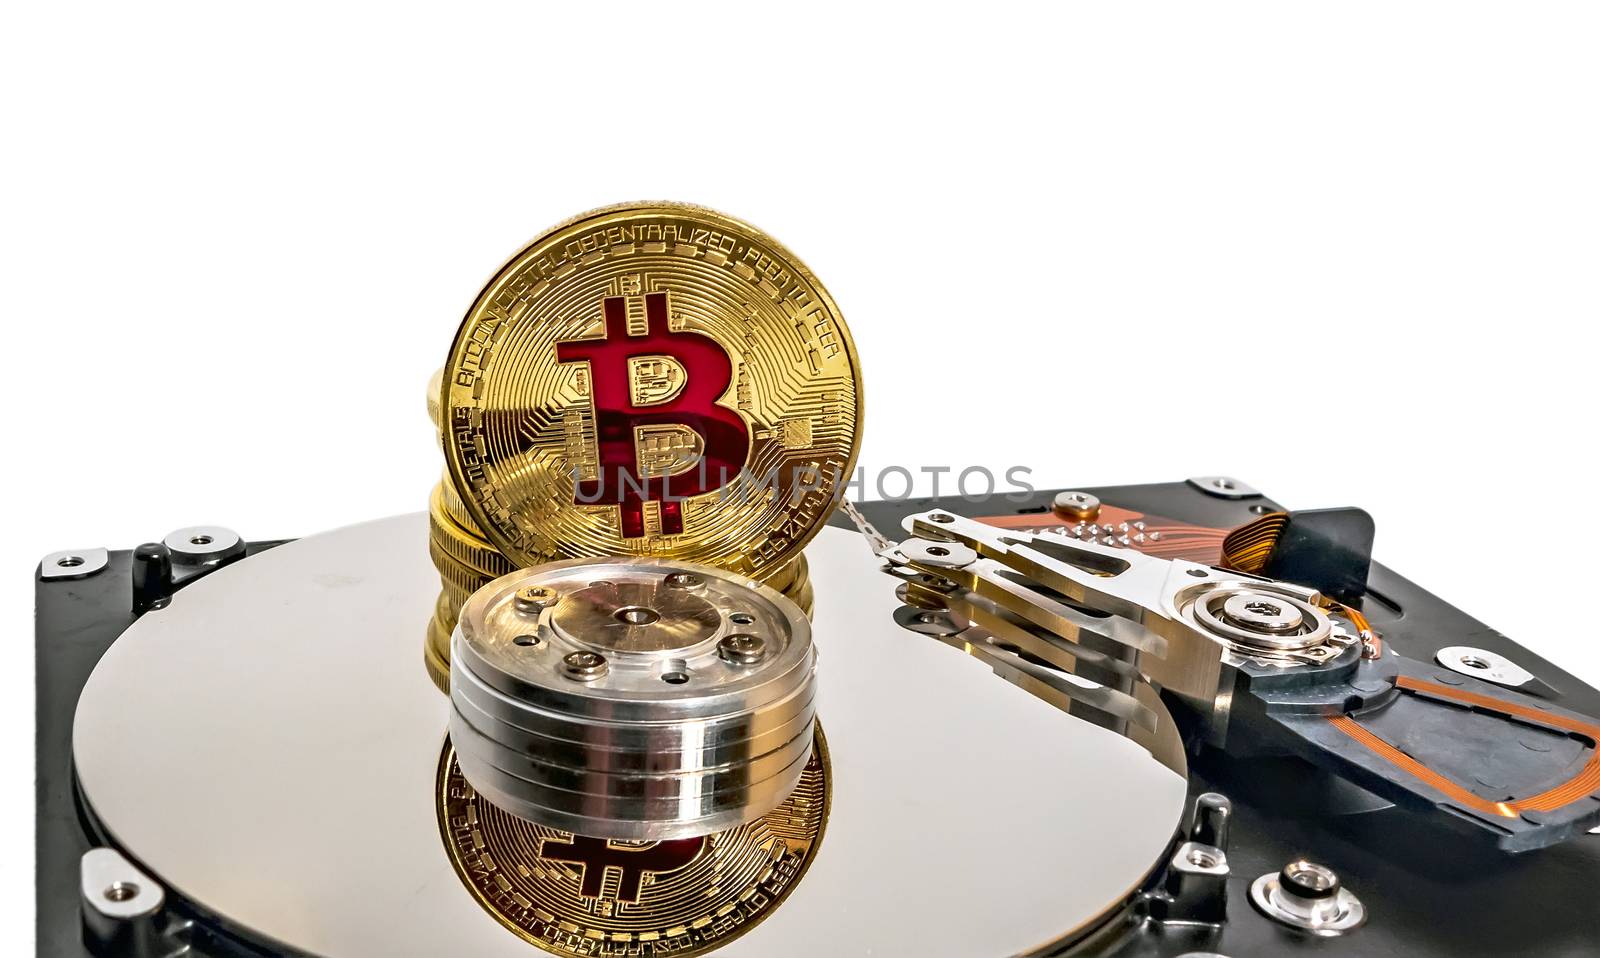 Physical Coin Cryptocurrency BTC Gold Plated Bitcoin in laptop hard disk server network concept. Crypto currency blockchain Coin virtual money concept isolated on white background.